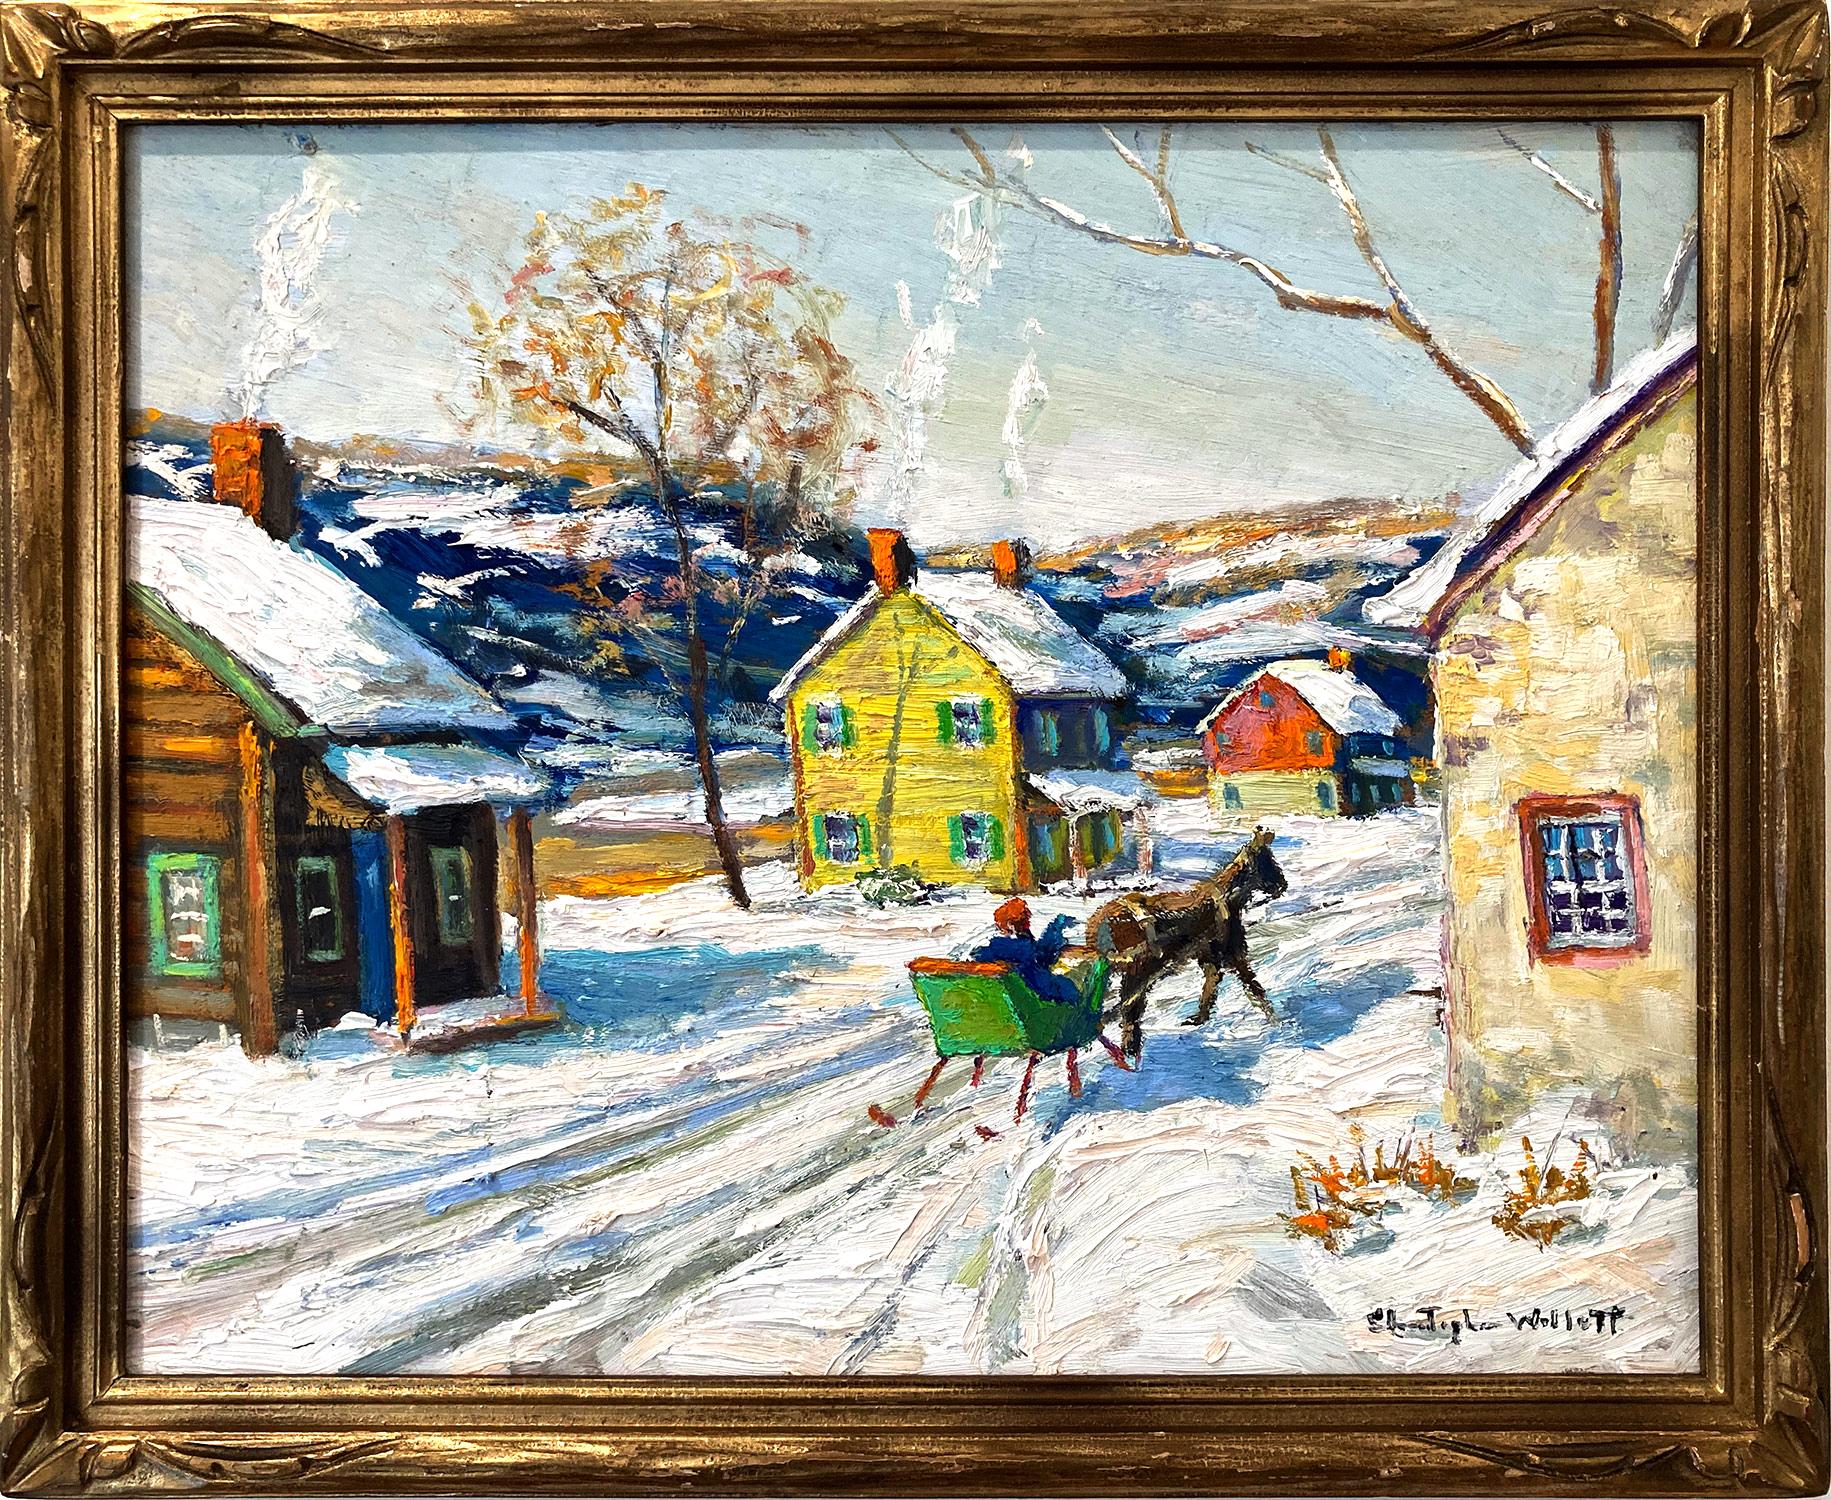 Christopher Willett Landscape Painting - "Going to New Hope" Bucks County PA, Pastoral Winter Landscape Oil Painting